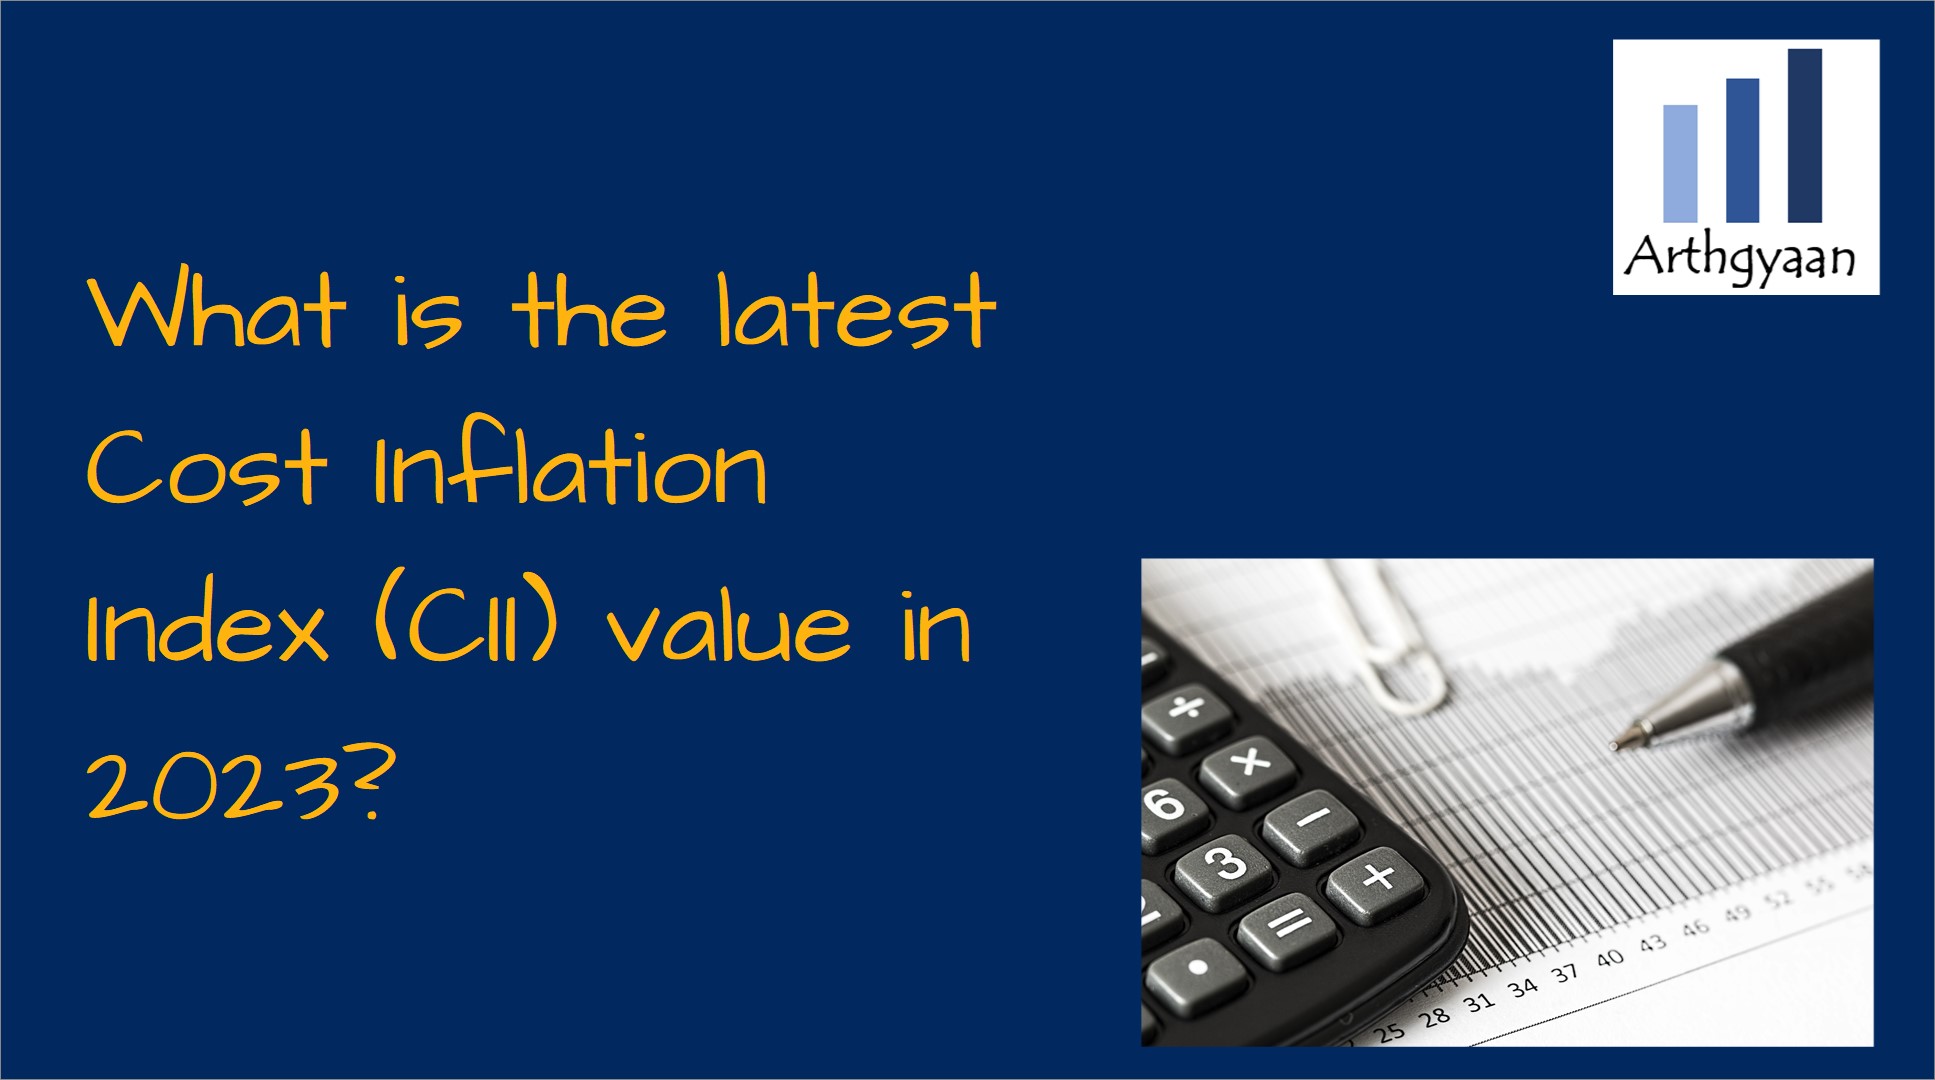 <p>This article shows the latest Cost Inflation Index (CII) value for FY 2023-24. A table of historical values is also available.</p>

